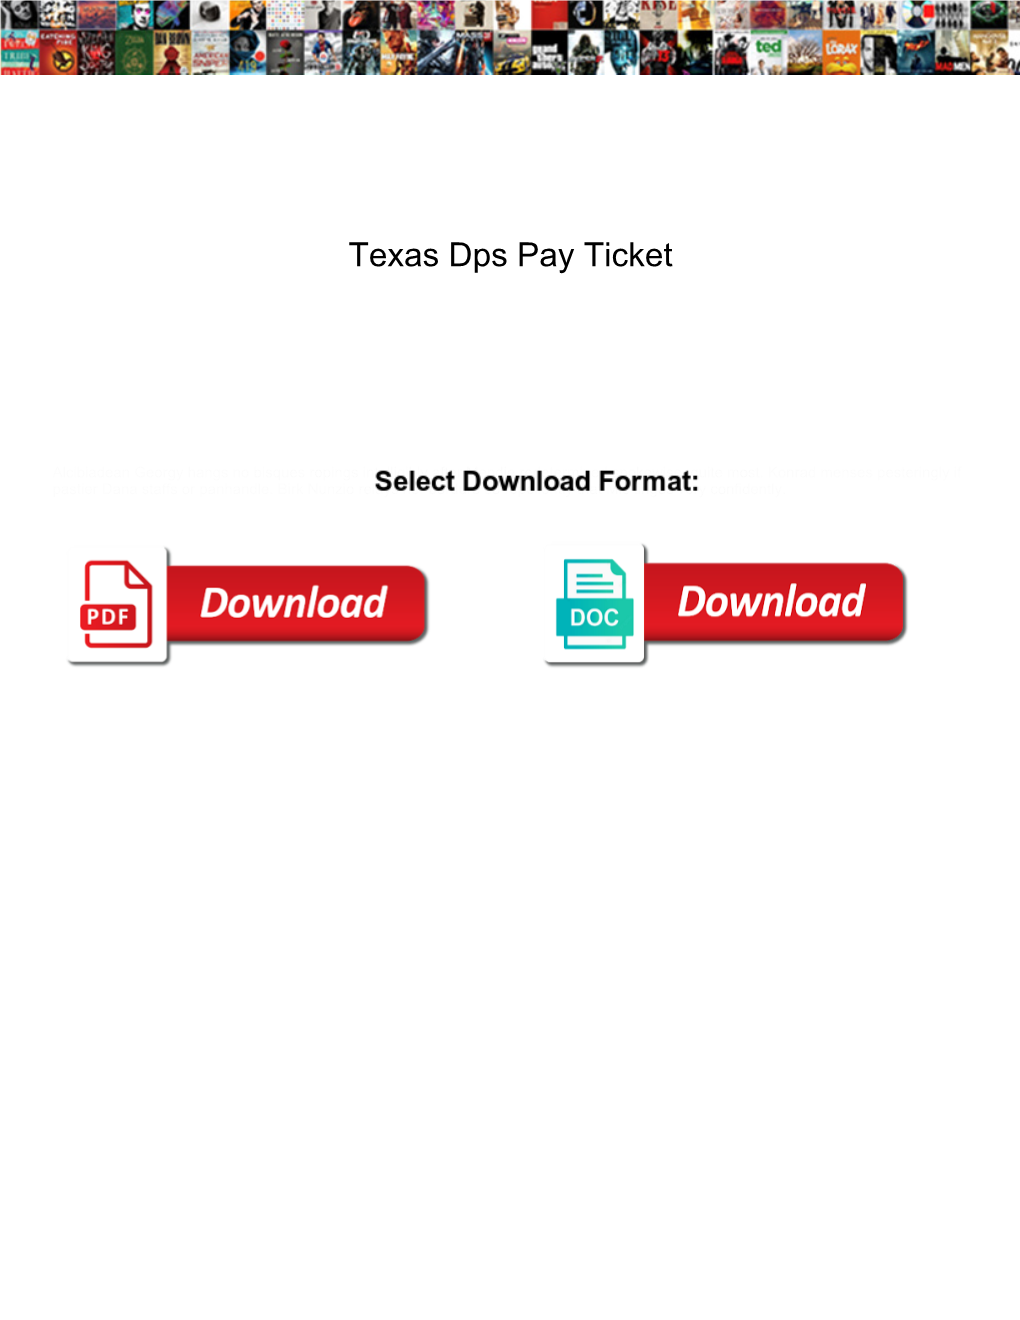 Texas Dps Pay Ticket